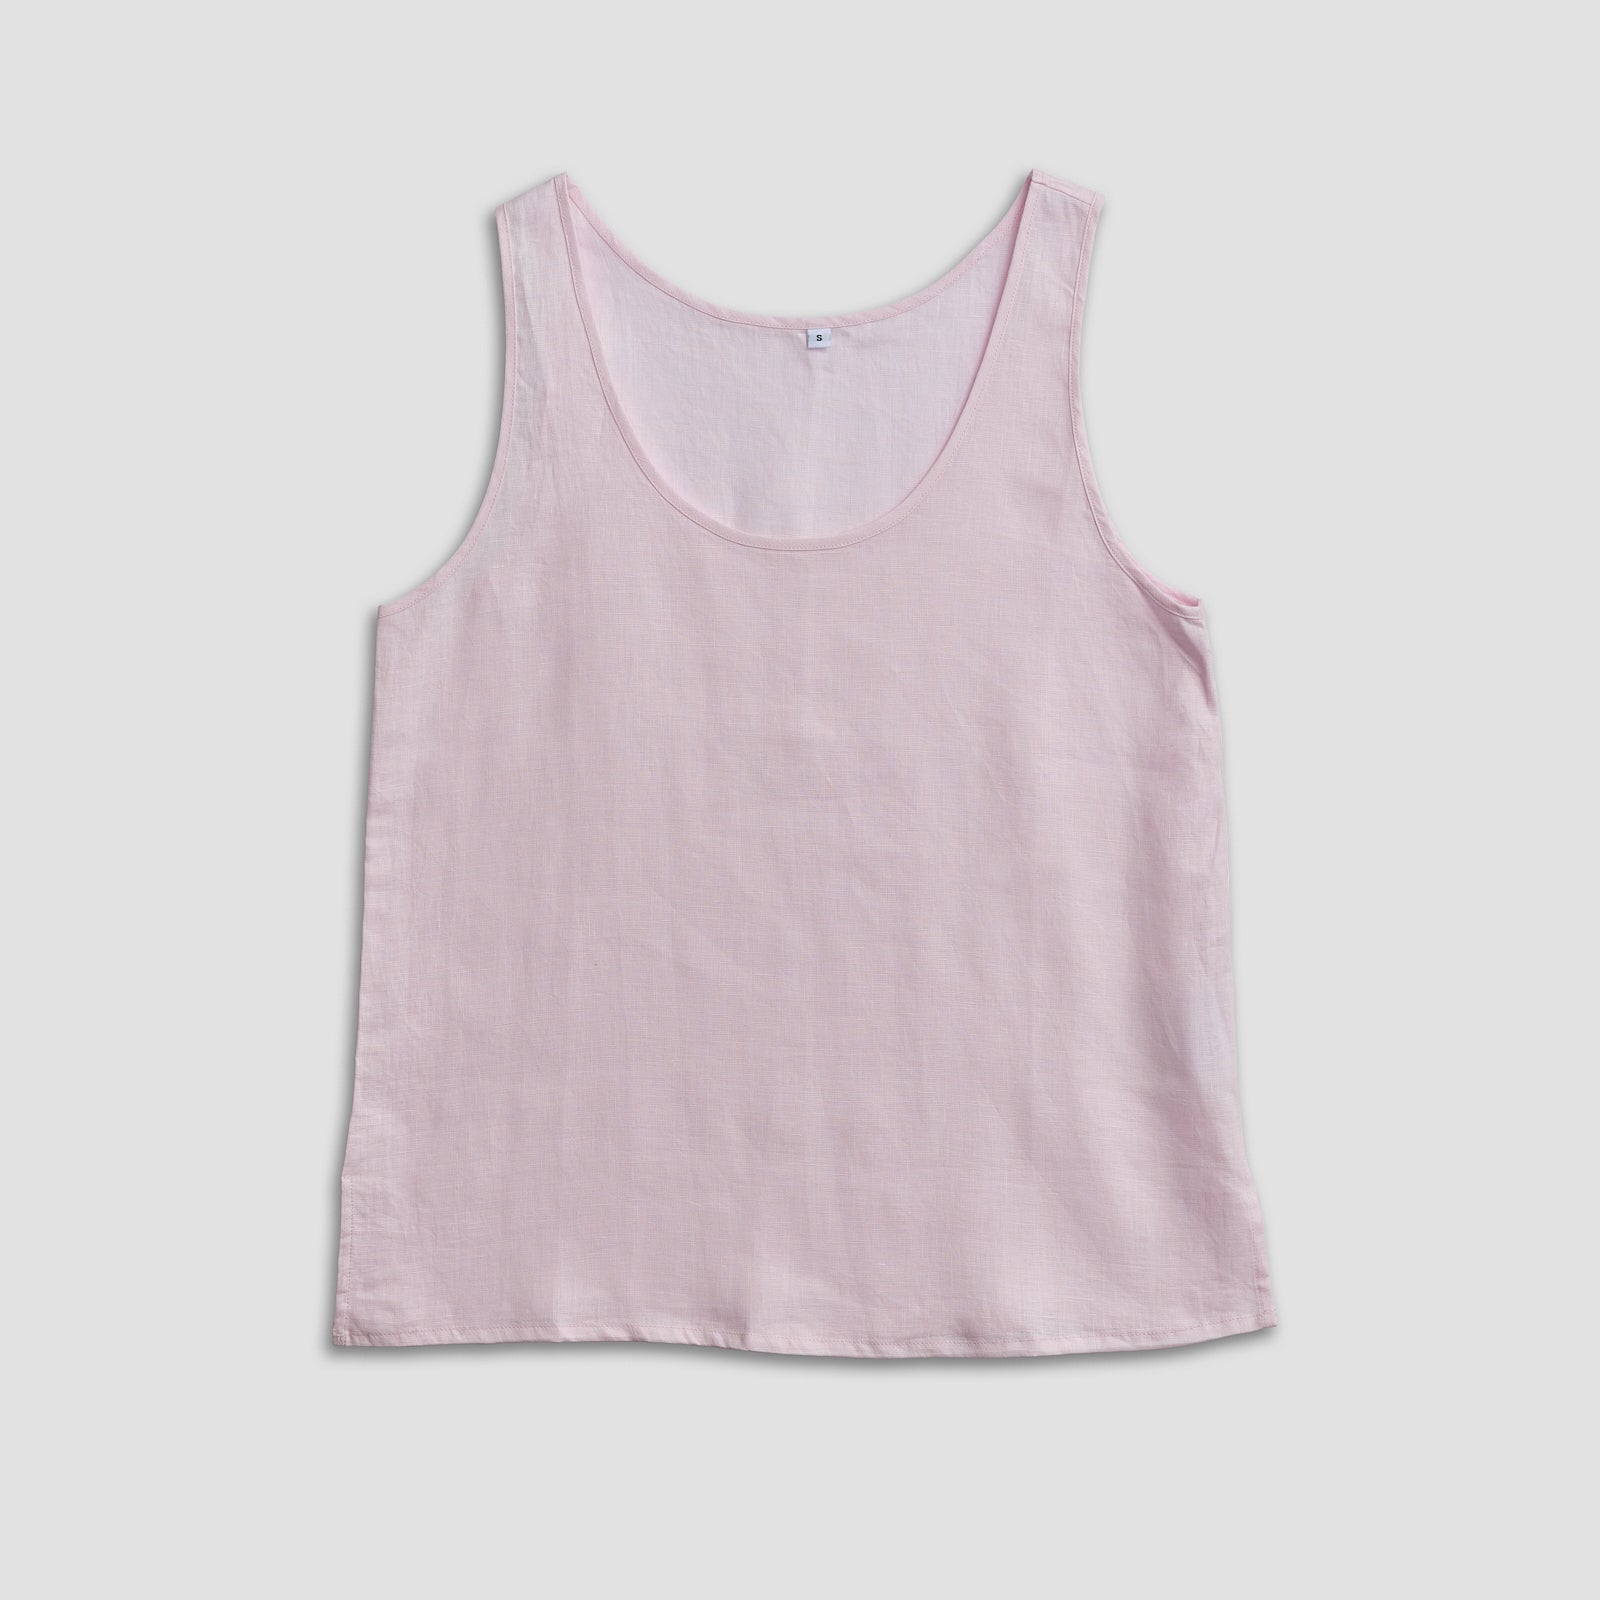 Blush Pink Cami Top - Piglet in Bed